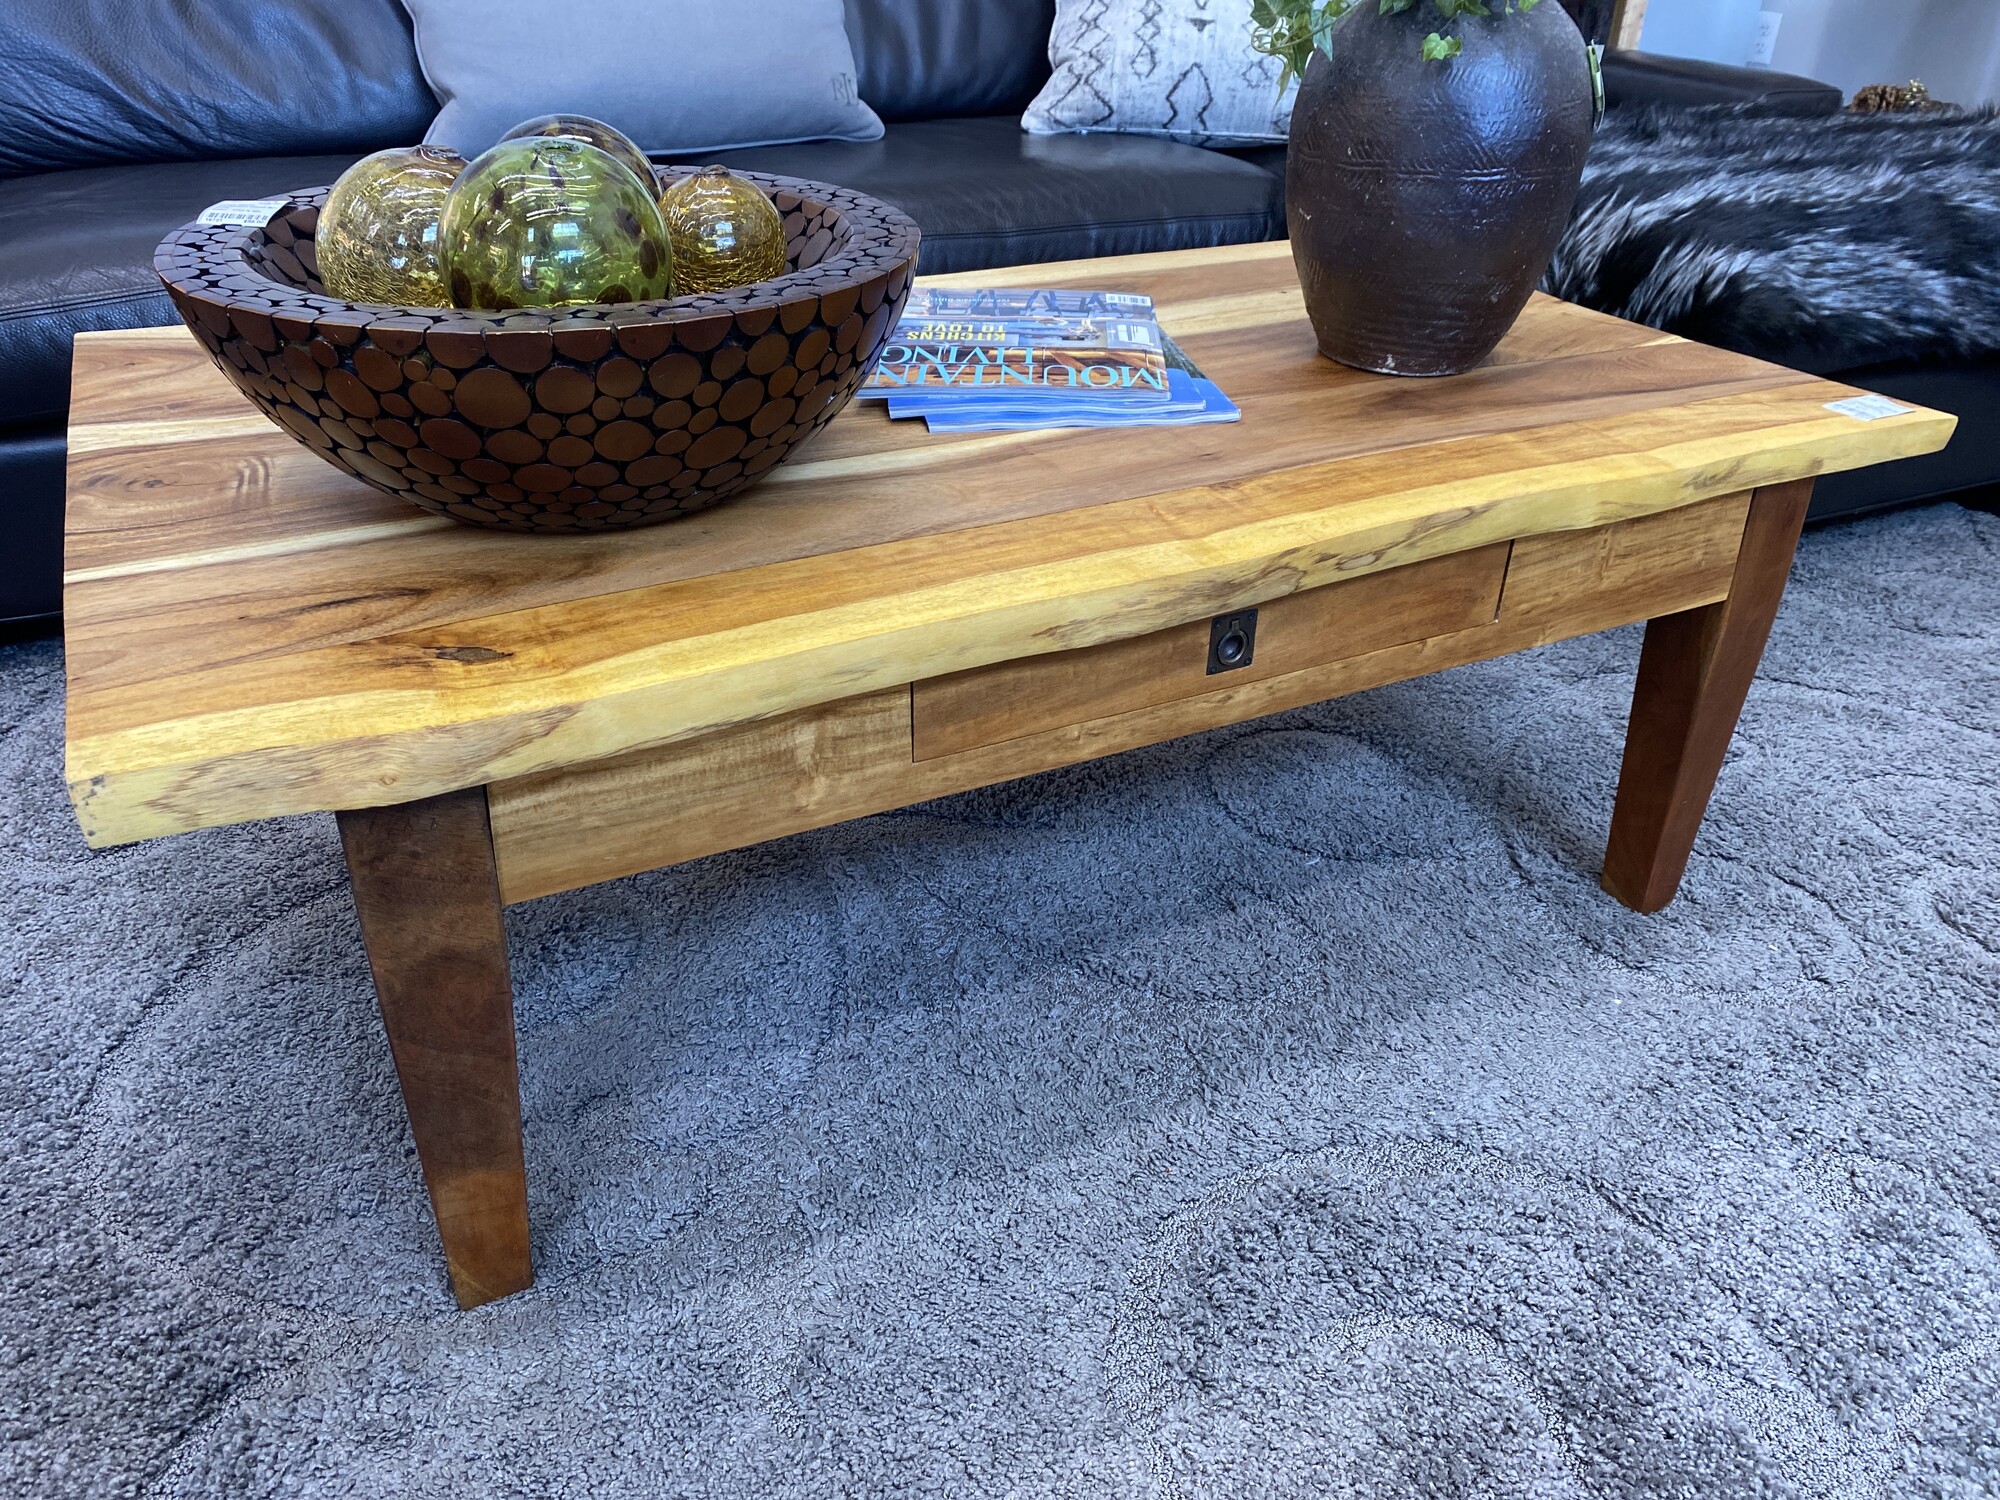 Pith Coffee Table

Size: 50W x 27L